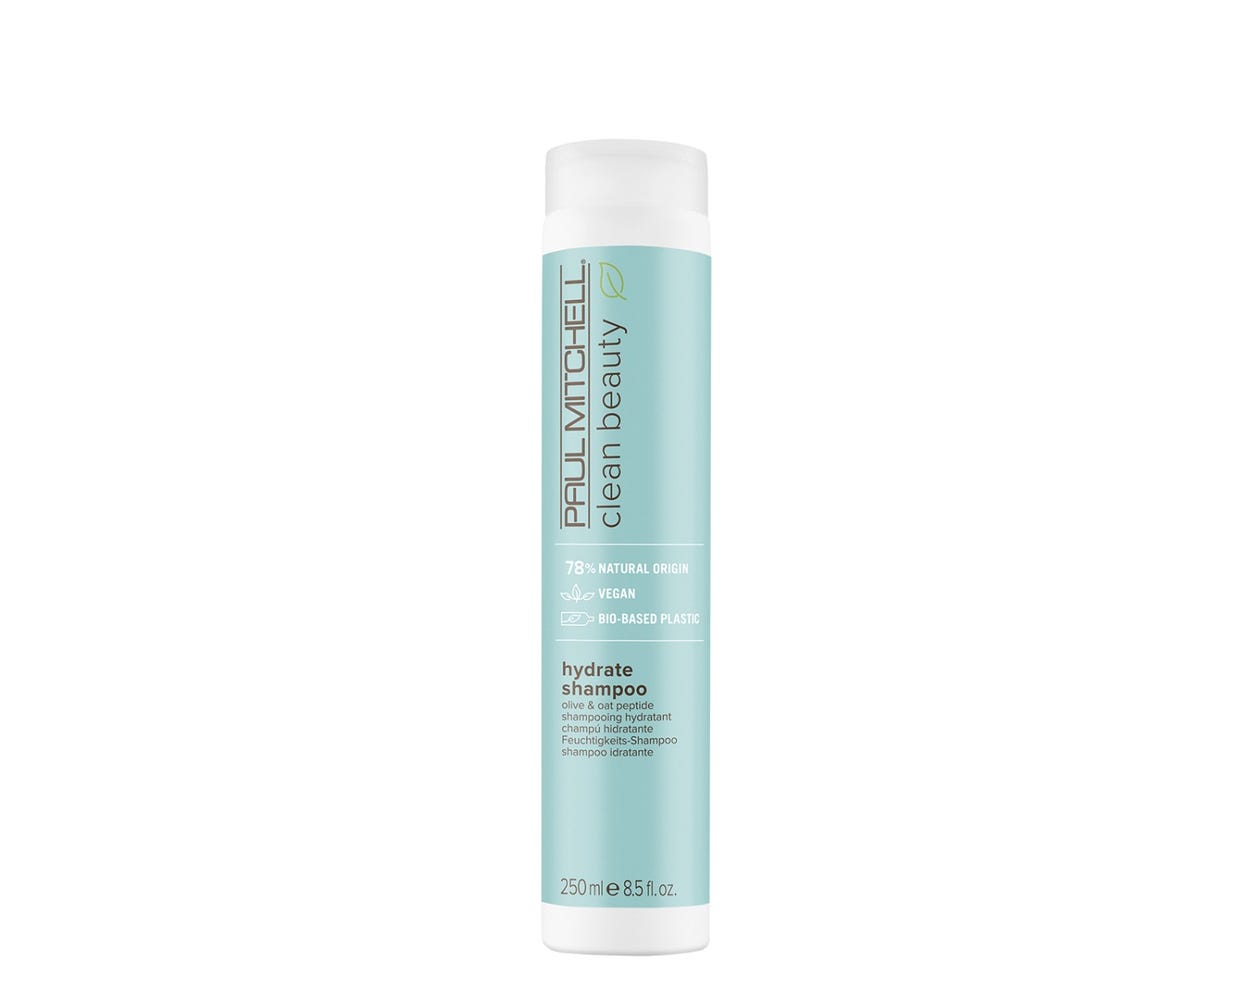 Paul Mitchell Clean Beauty Hydrate Shampoo 250ml - Hair products New  Zealand | Nation wide hairdressing & hair care group